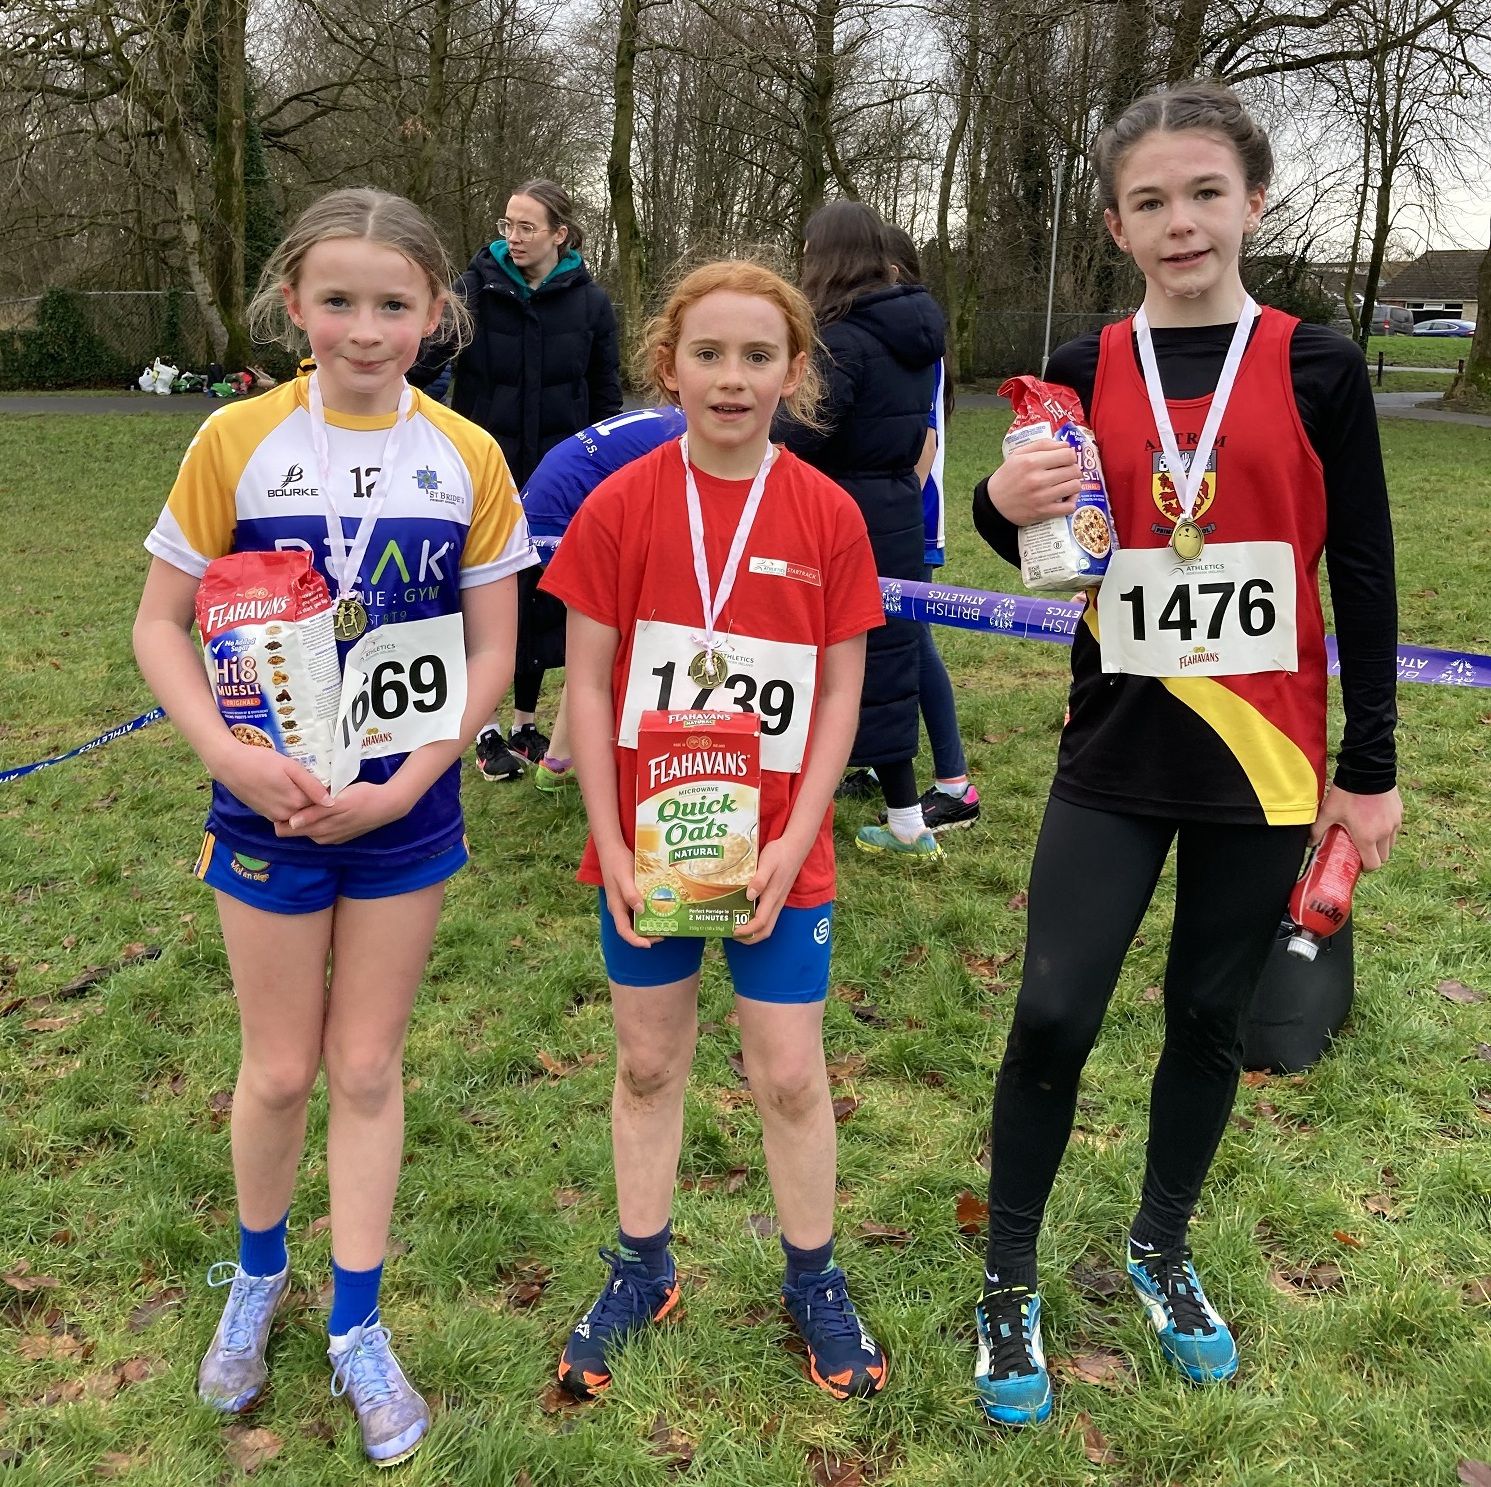 Aoife Burke in second place, Eloise McAuley in first place and Evie Fawcett in third place in the first girls’ race